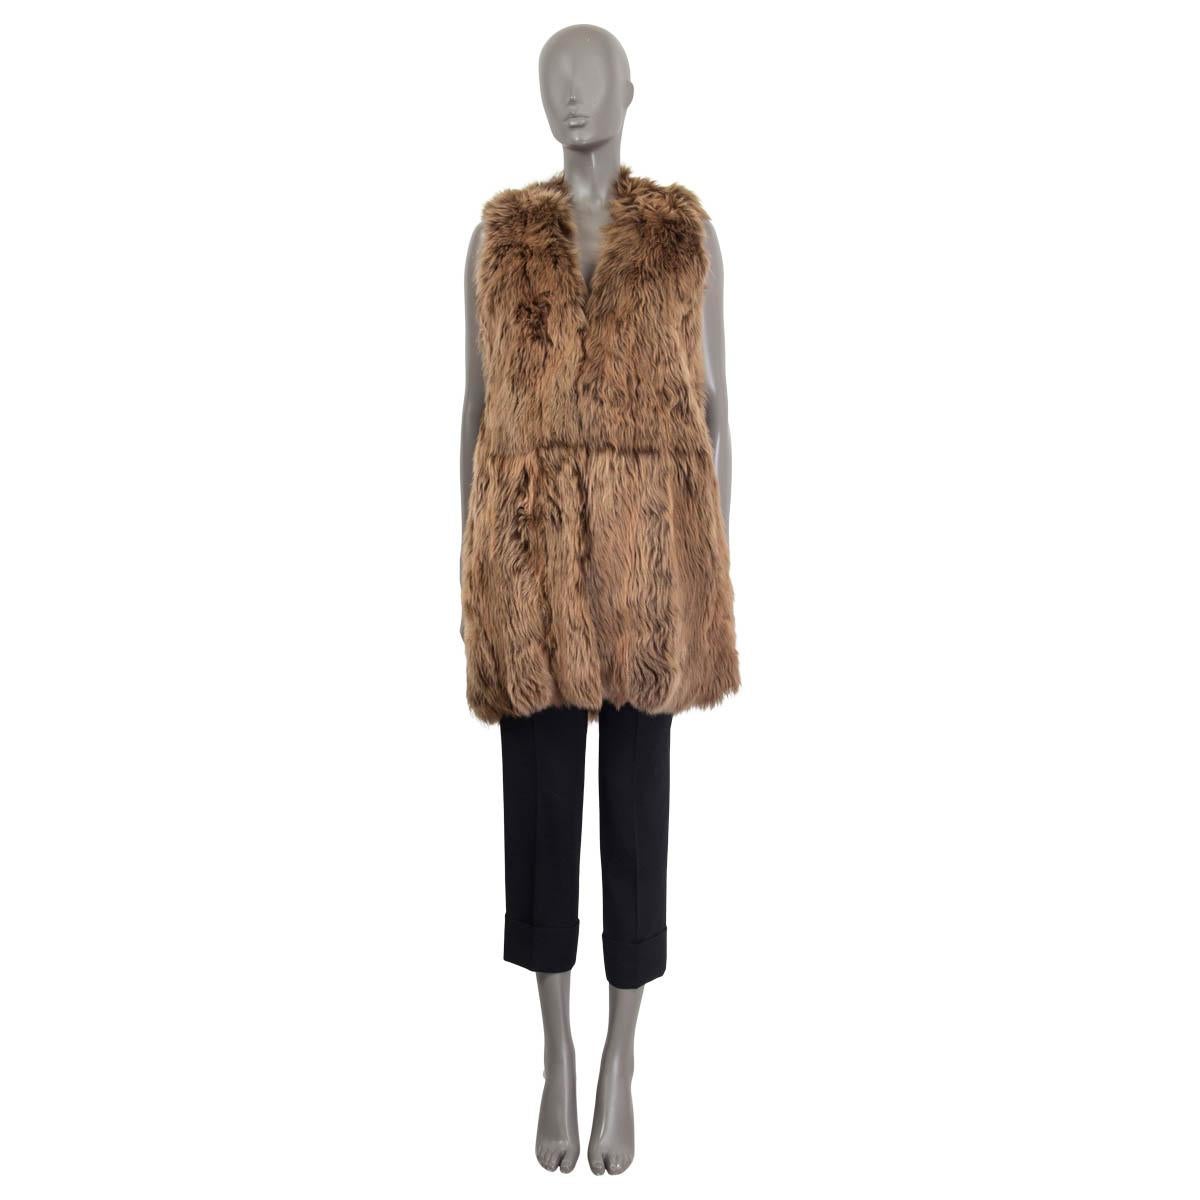 100% authentic Ralph Lauren sleeveless shearling vest in brown lamb fur (100%). Comes with two pockets on the front and a v-neck. Opens with four hooks on the front. Lined in silk (100%). Has been worn and is in excellent